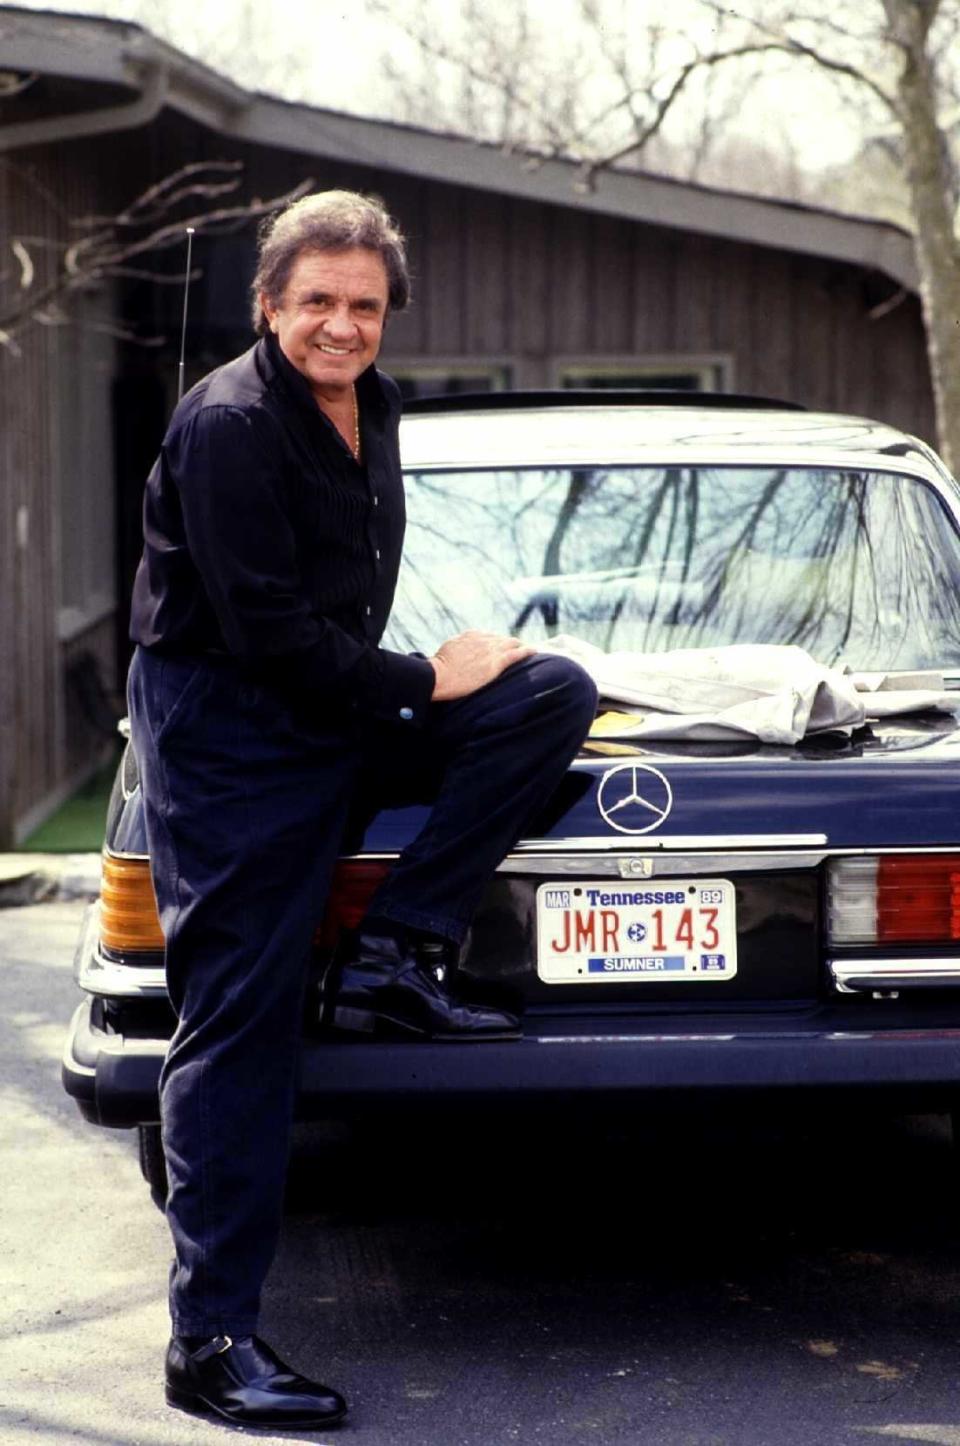 Johnny Cash shows off a car in the driveway, 1988. (Photo: Getty Images)